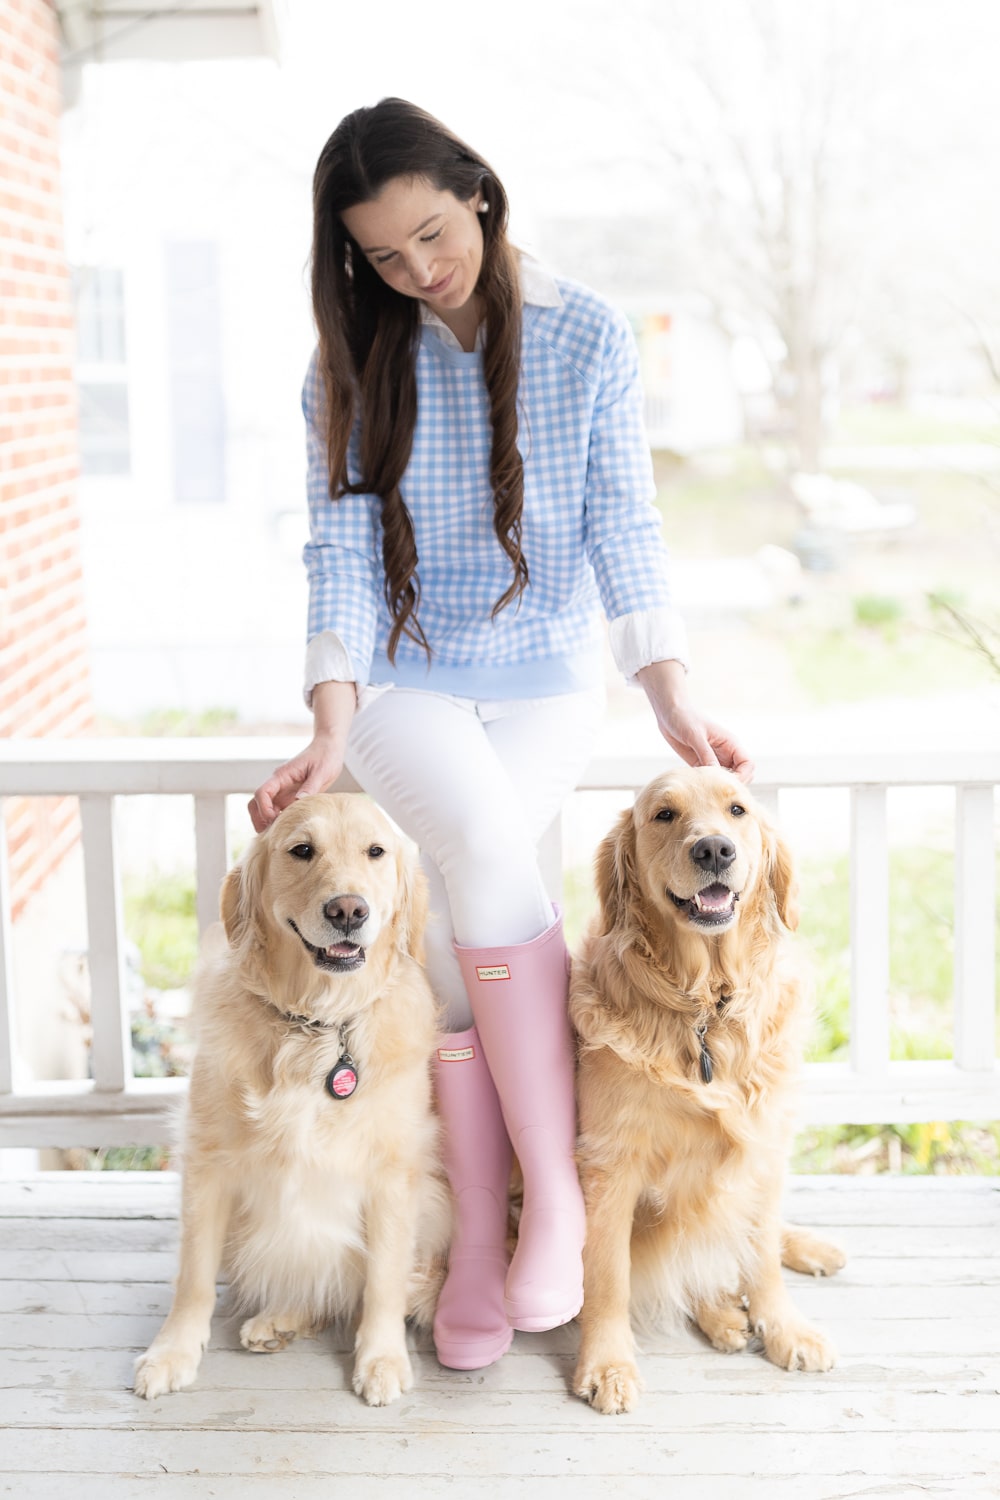 Preppy fashion blogger Stephanie Ziajka with her two golden retriever puppies, Nala and Nellie, on Diary of a Debutante